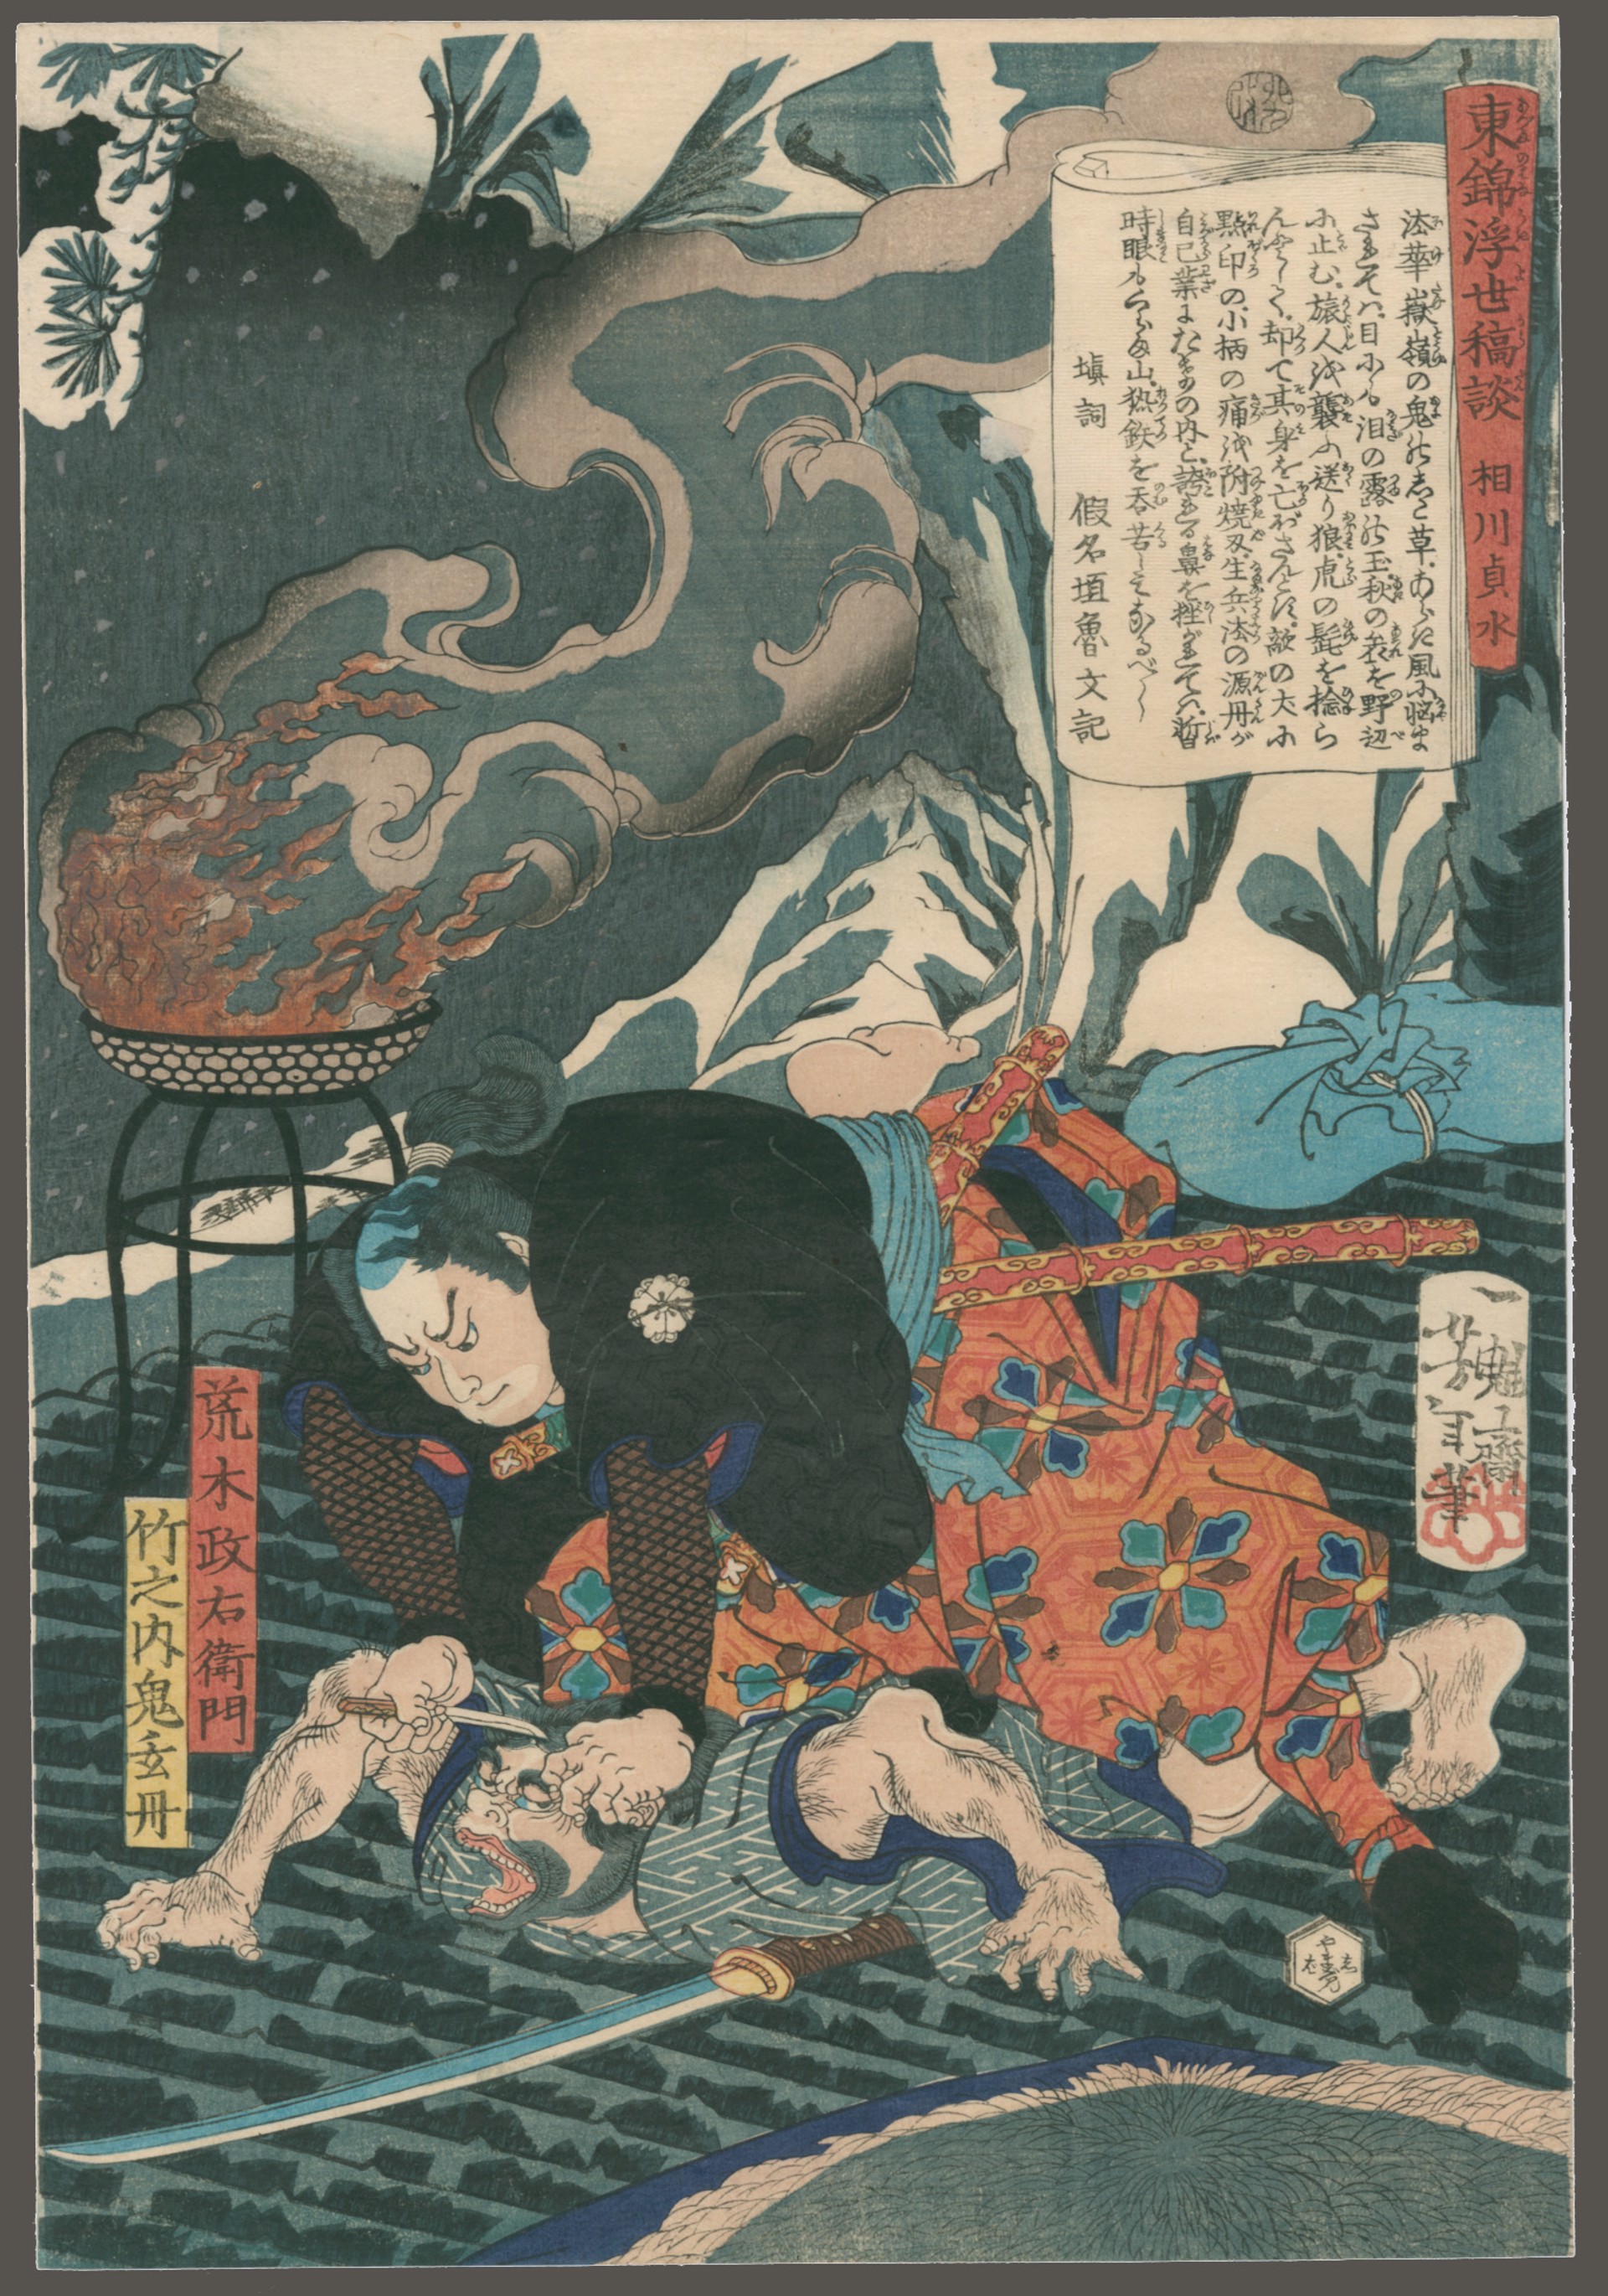 Araki Masaemon Attacking Takanouchi Gentan with a Knife Tales of the Floating World on Eastern Brocade by Yoshitoshi